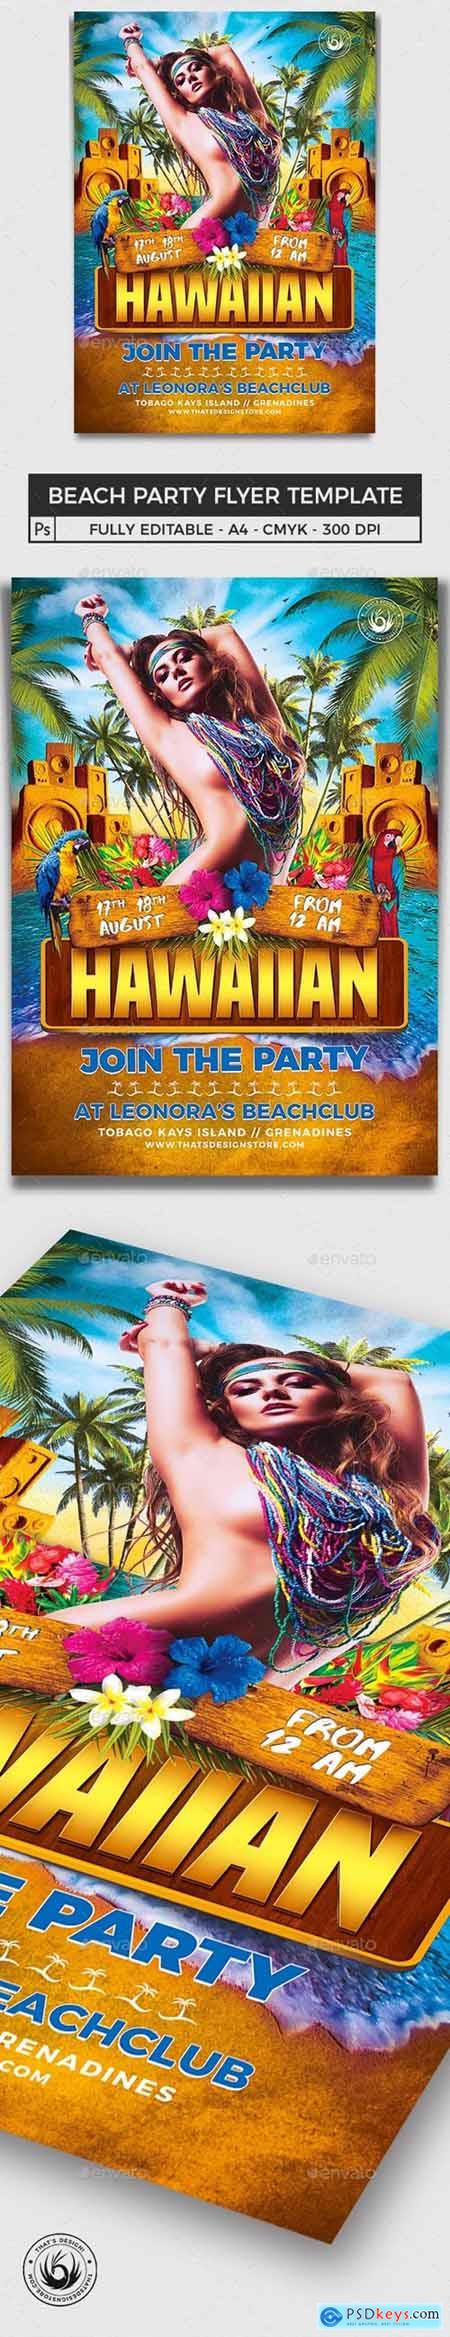 Beach Party Flyer Template V5 8146194